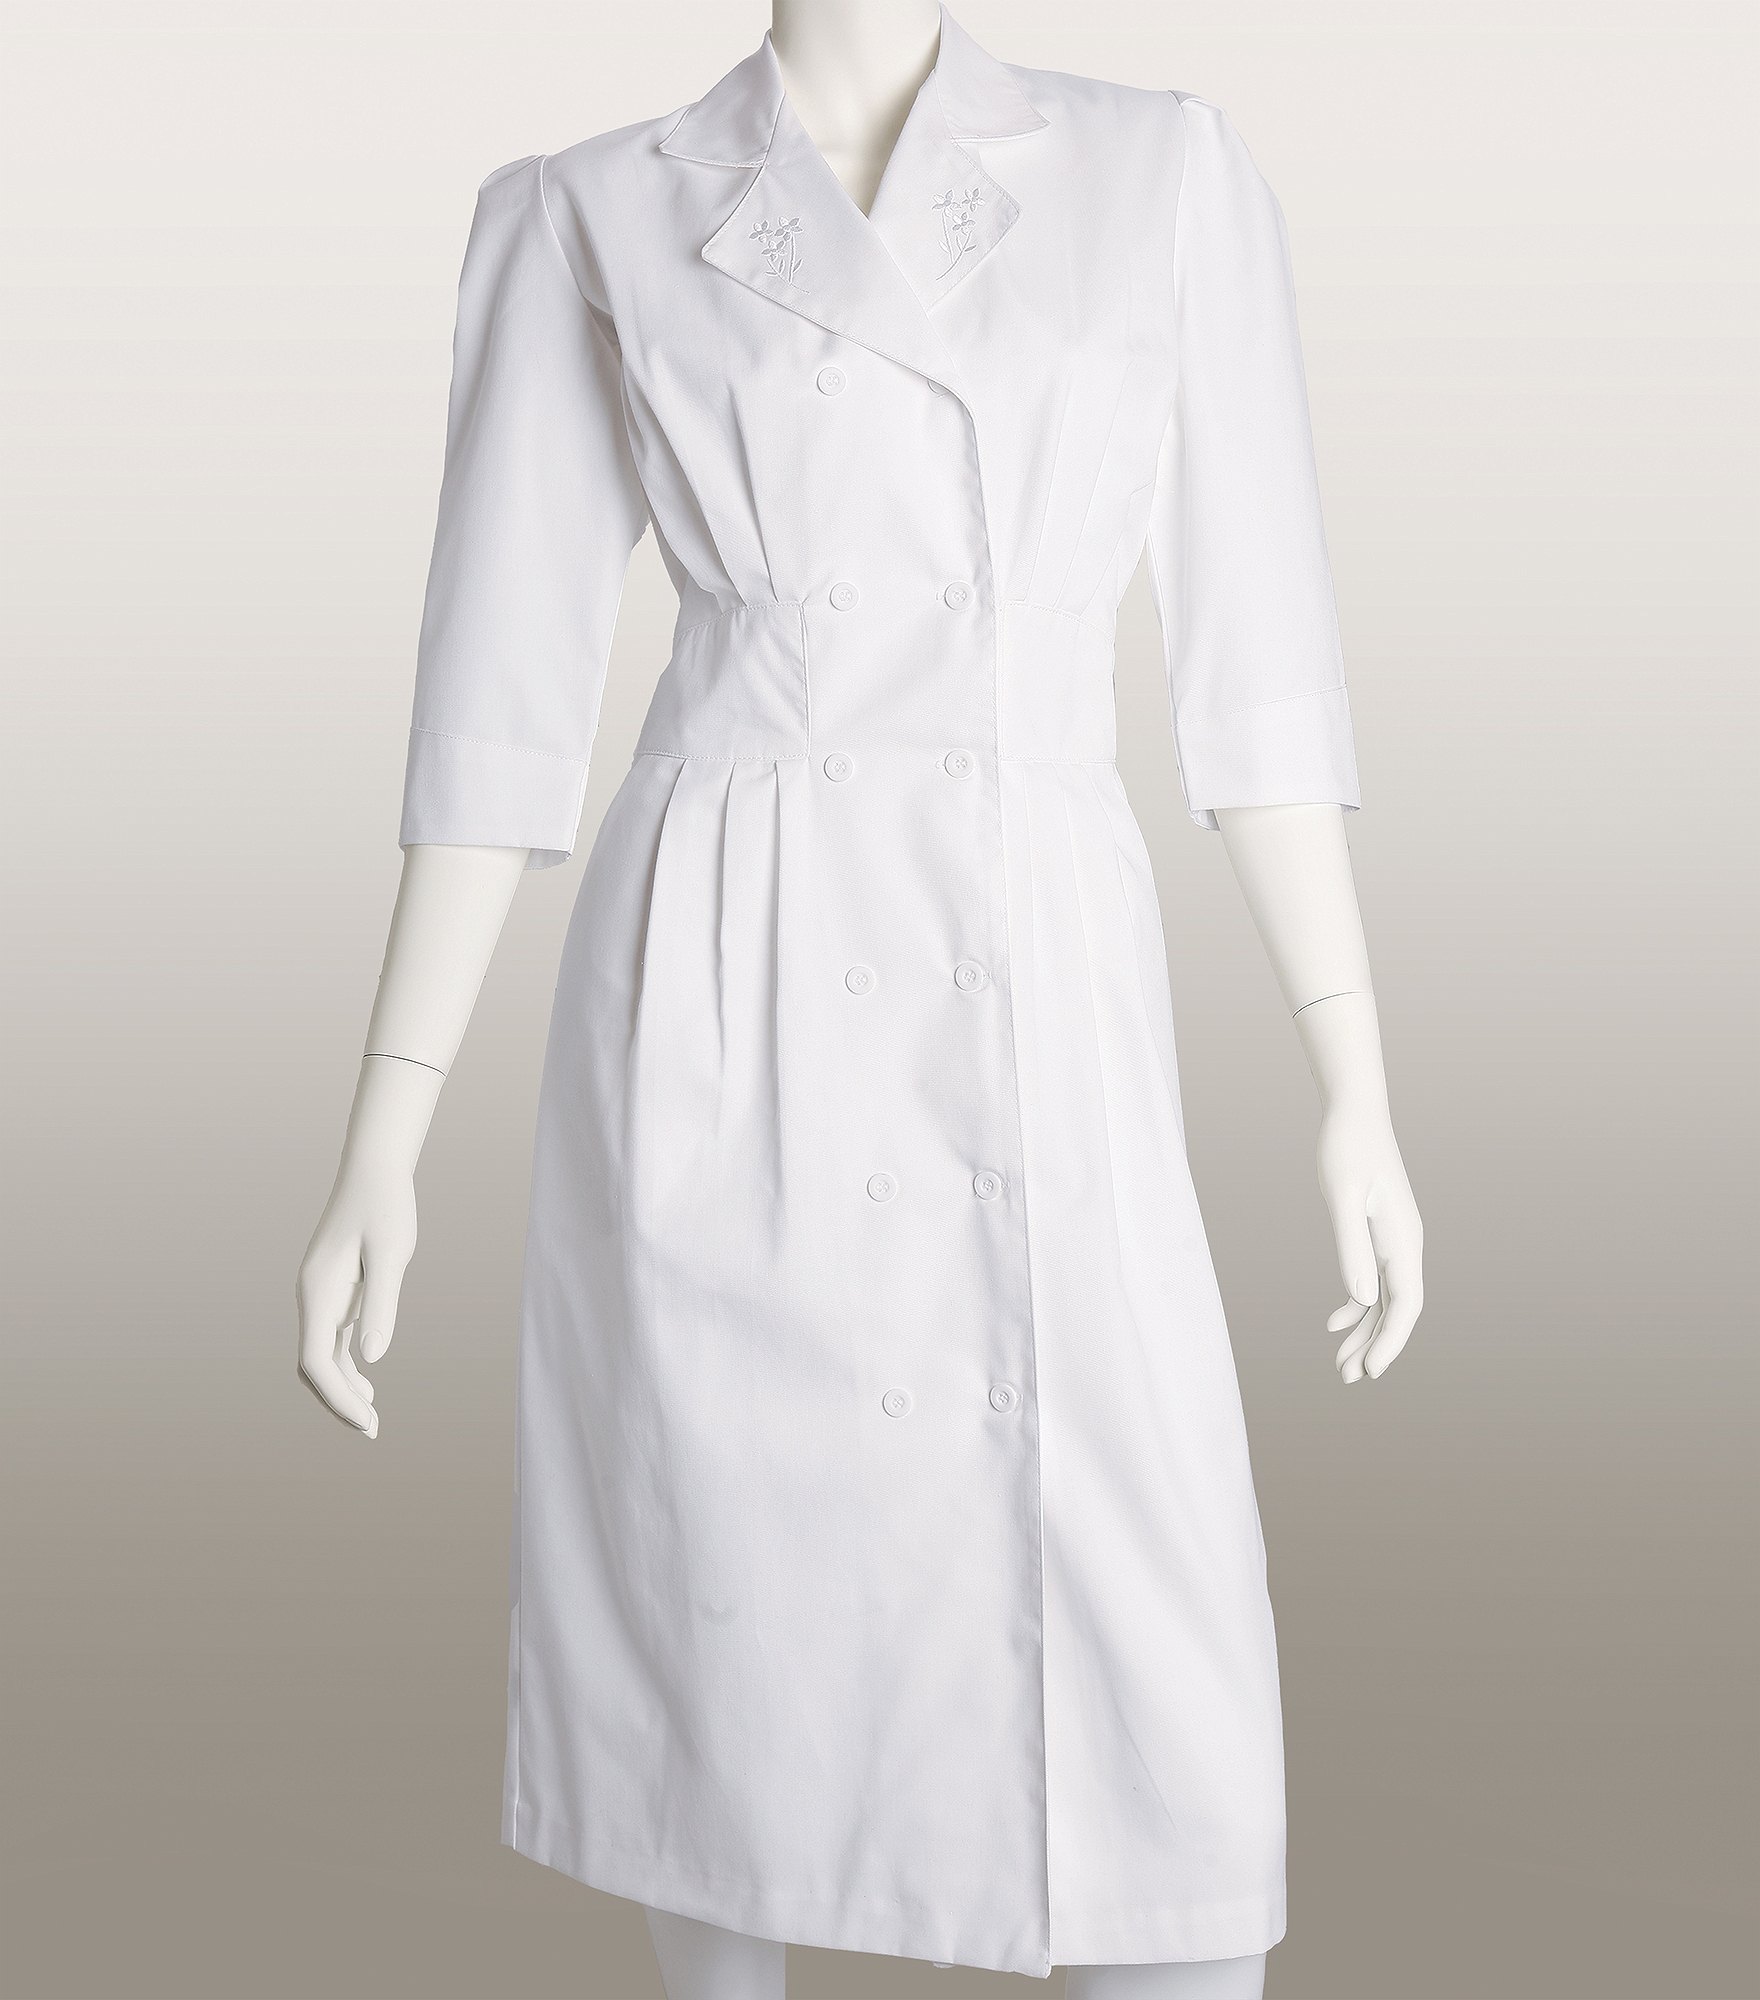 Prima by Barco 3/4 Sleeve Button Front White Scrub Dress-58505